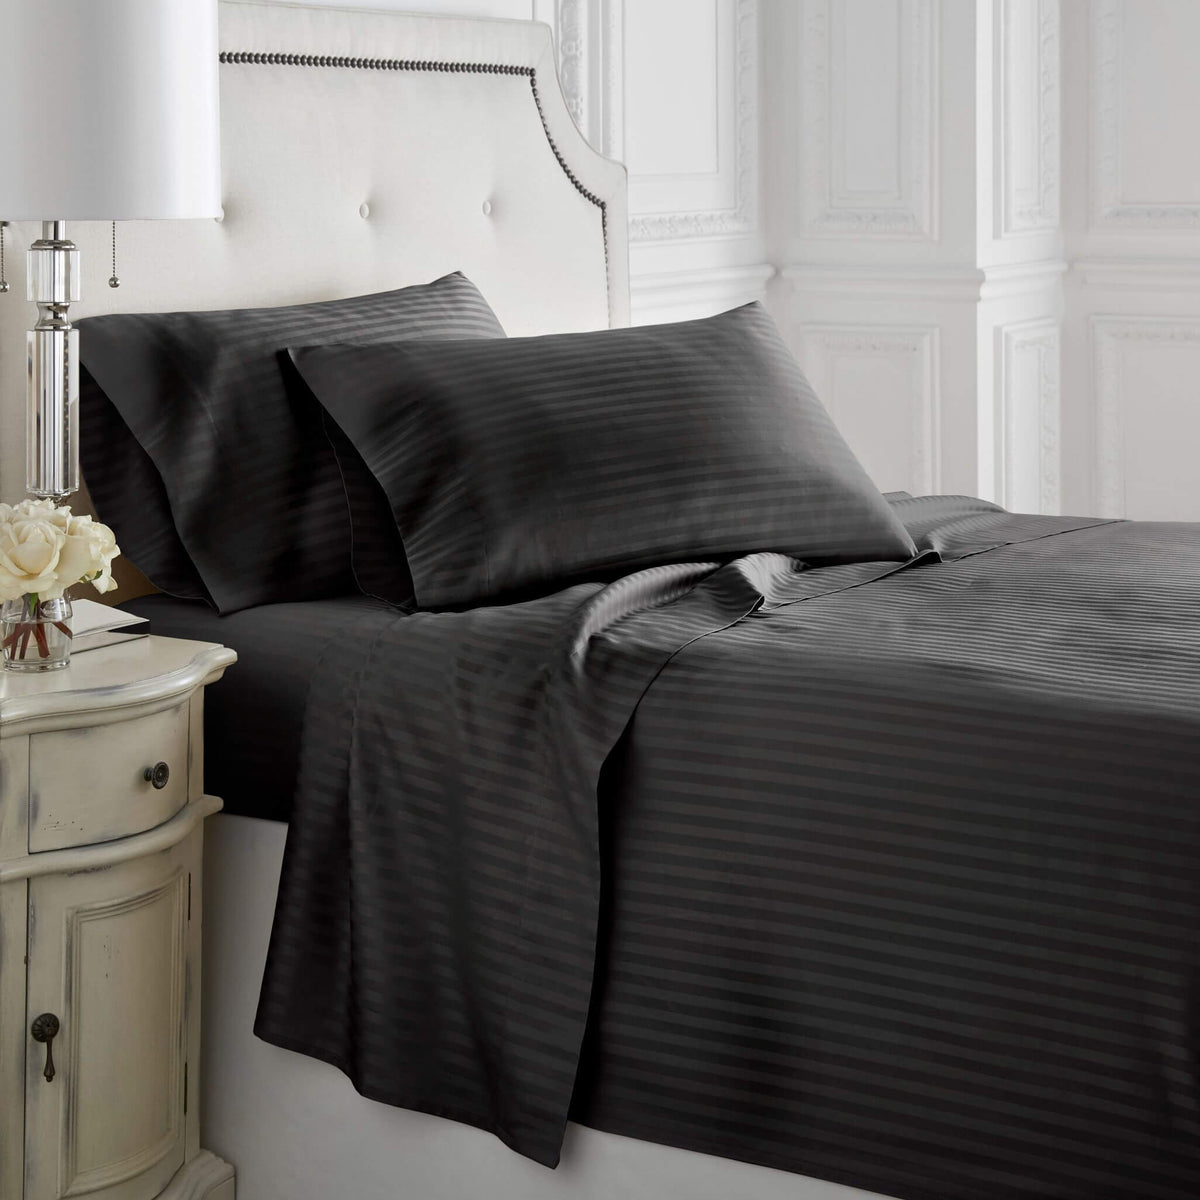 Details about   100% EGYPTIAN COTTON DUVET COVER SET FLAT SHEET PREMIUM HOTEL QUALITY ALL SIZE 